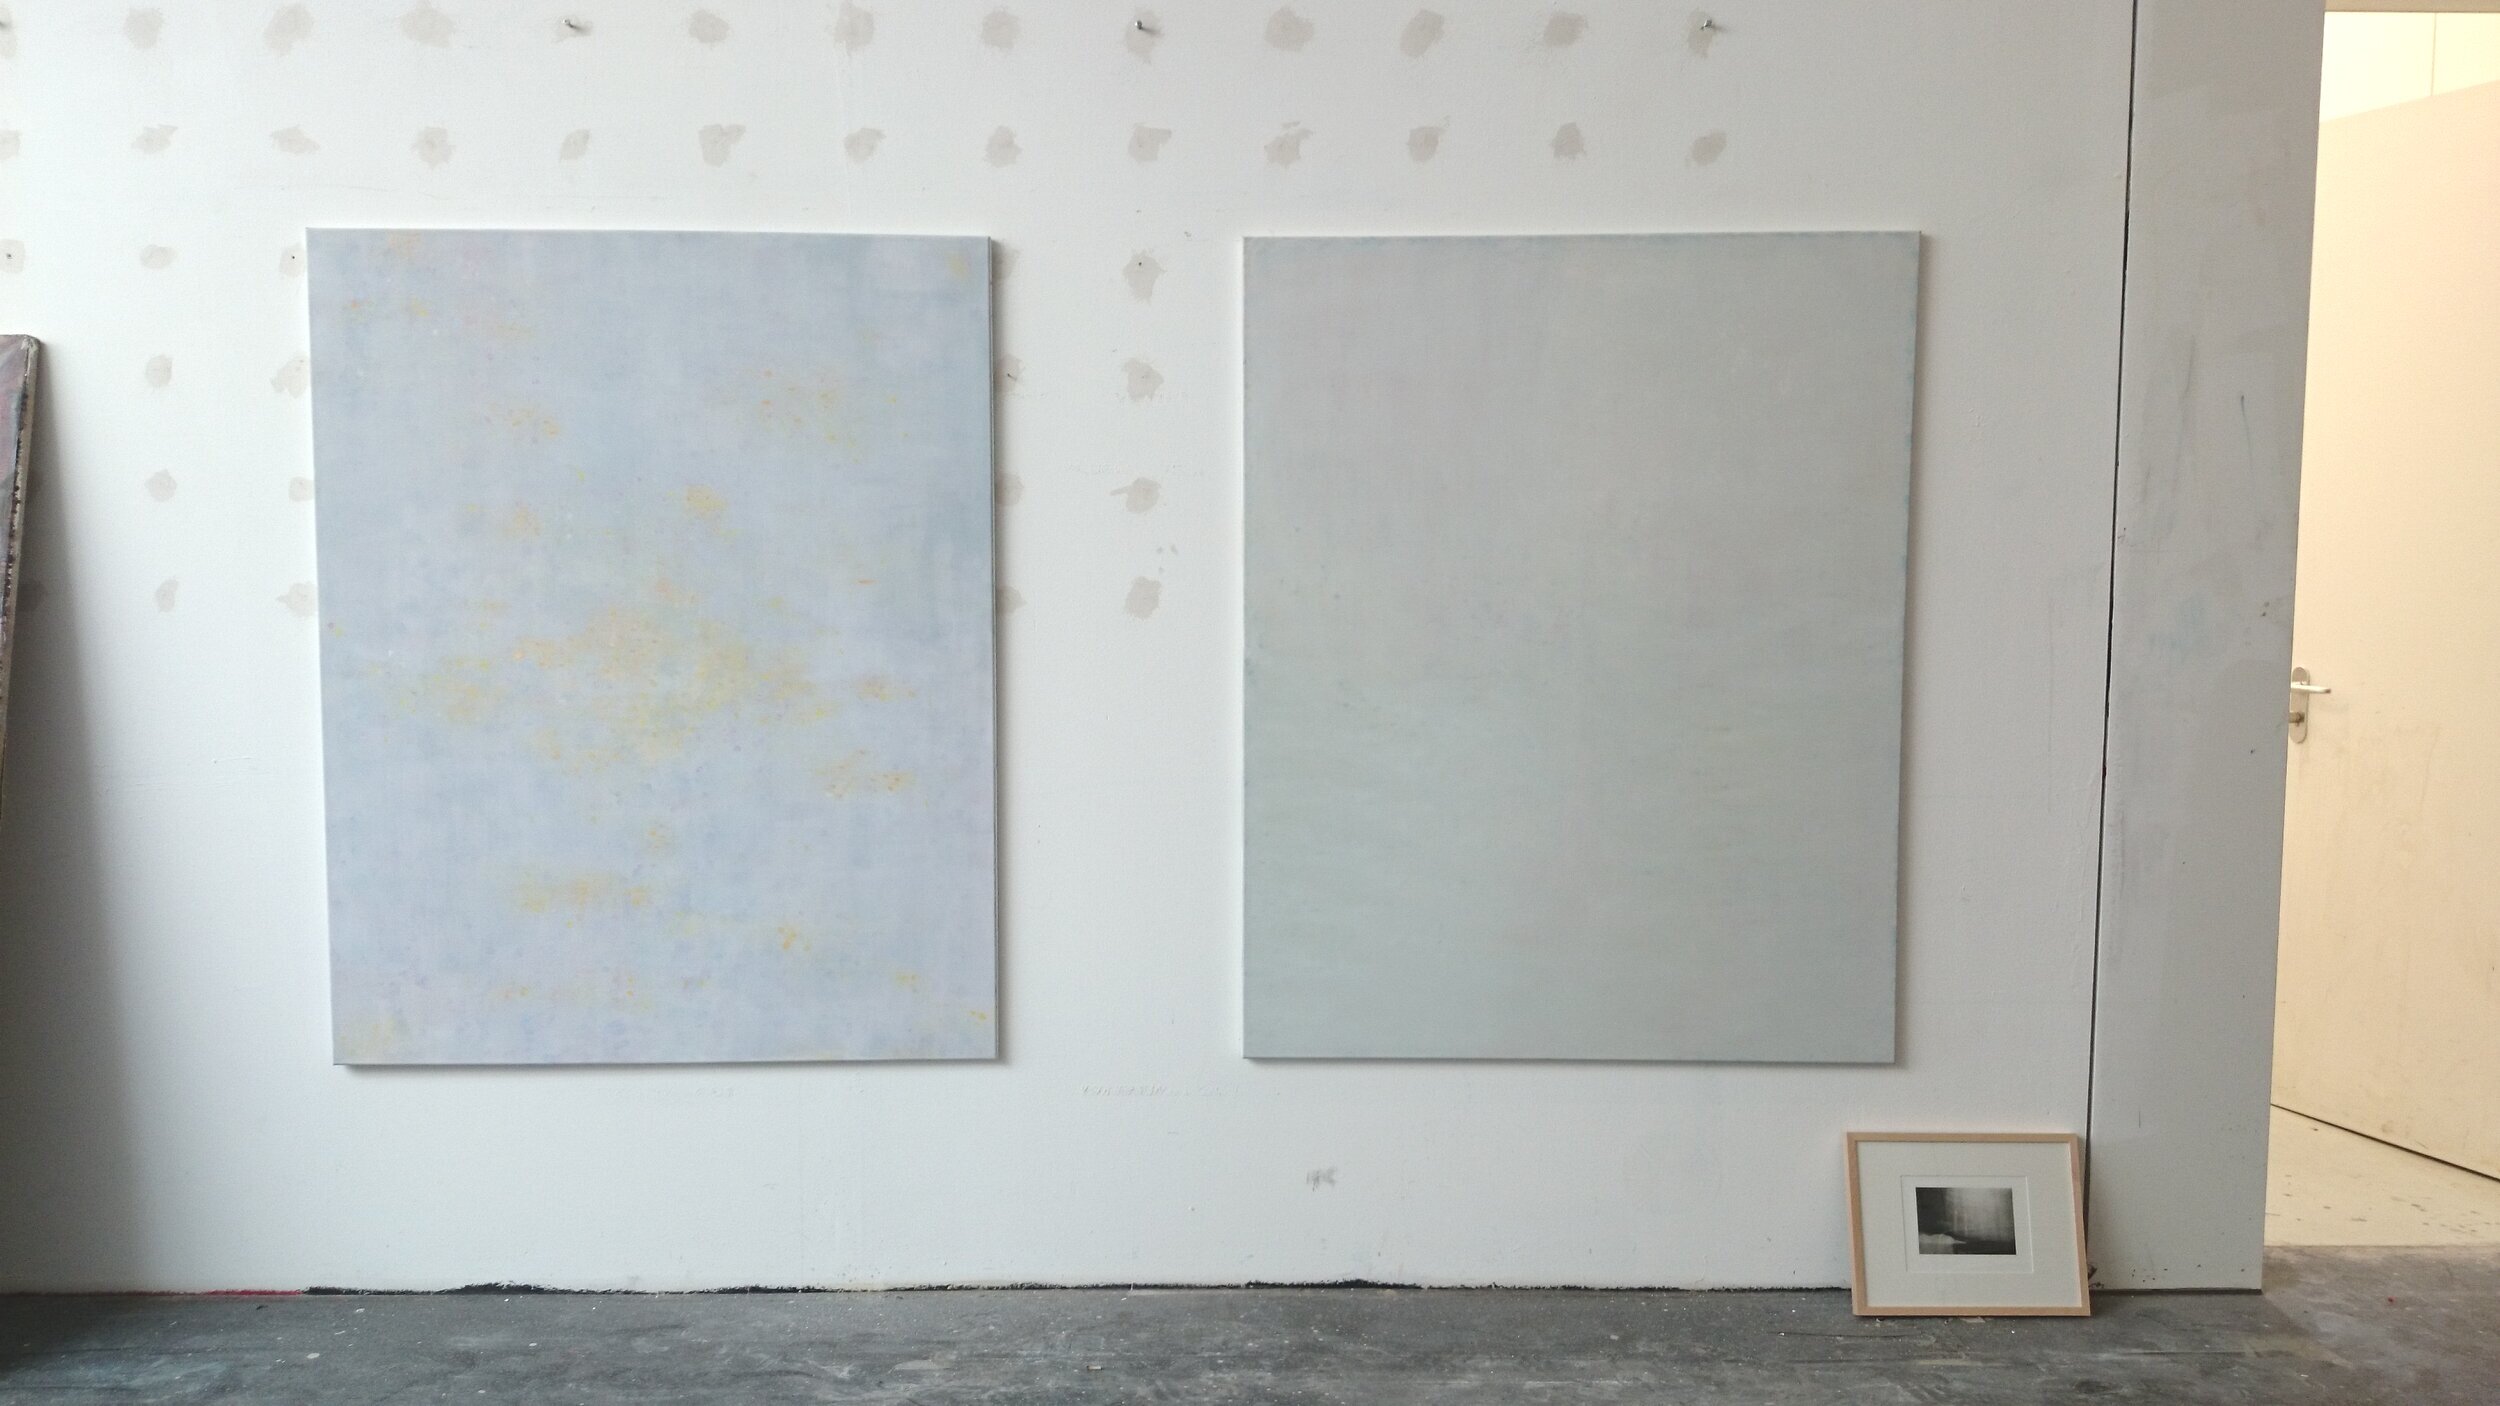  The Perfect Void I &amp; II, 1 x 1,5 m, Japanese watercolour, acrylic and oil on canvas, 2015 (studio view) 